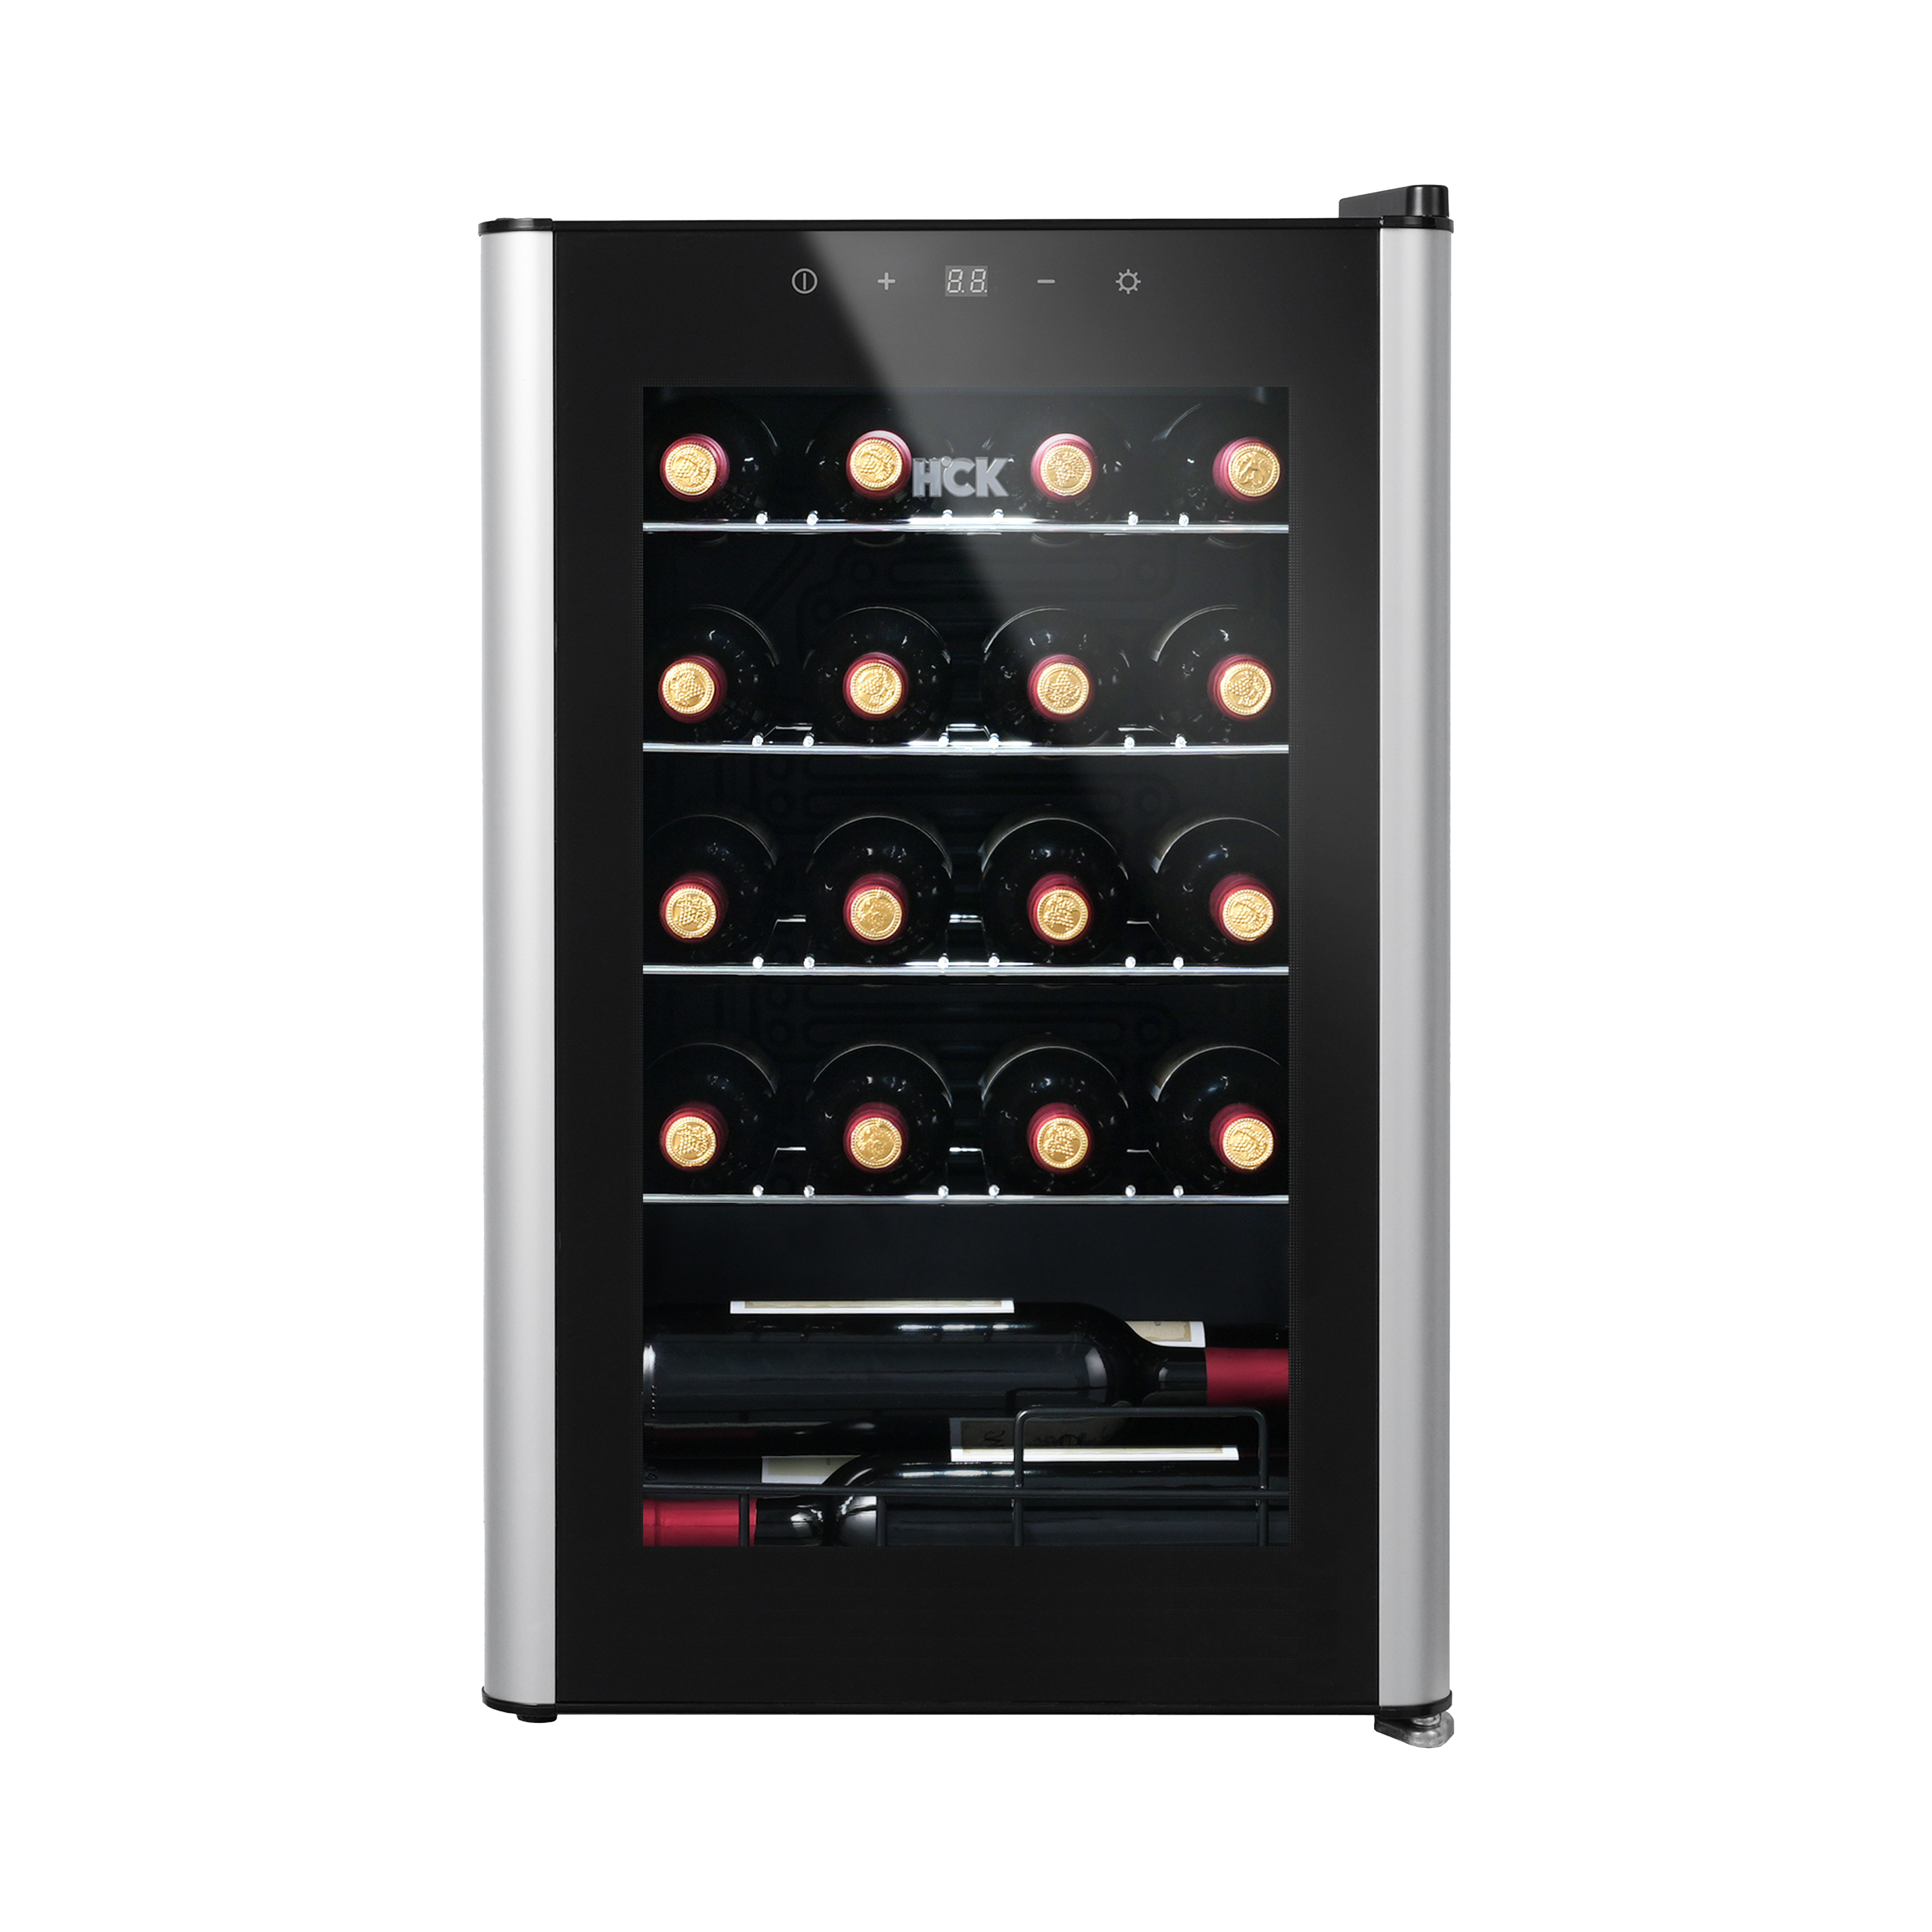 Front view of a 70L Freestanding Dual Zone Wine Fridge 24 Bottles with a glass door, showcasing the digital temperature control panel positioned on top of the door. The bottles of wine stored inside are visible through the door